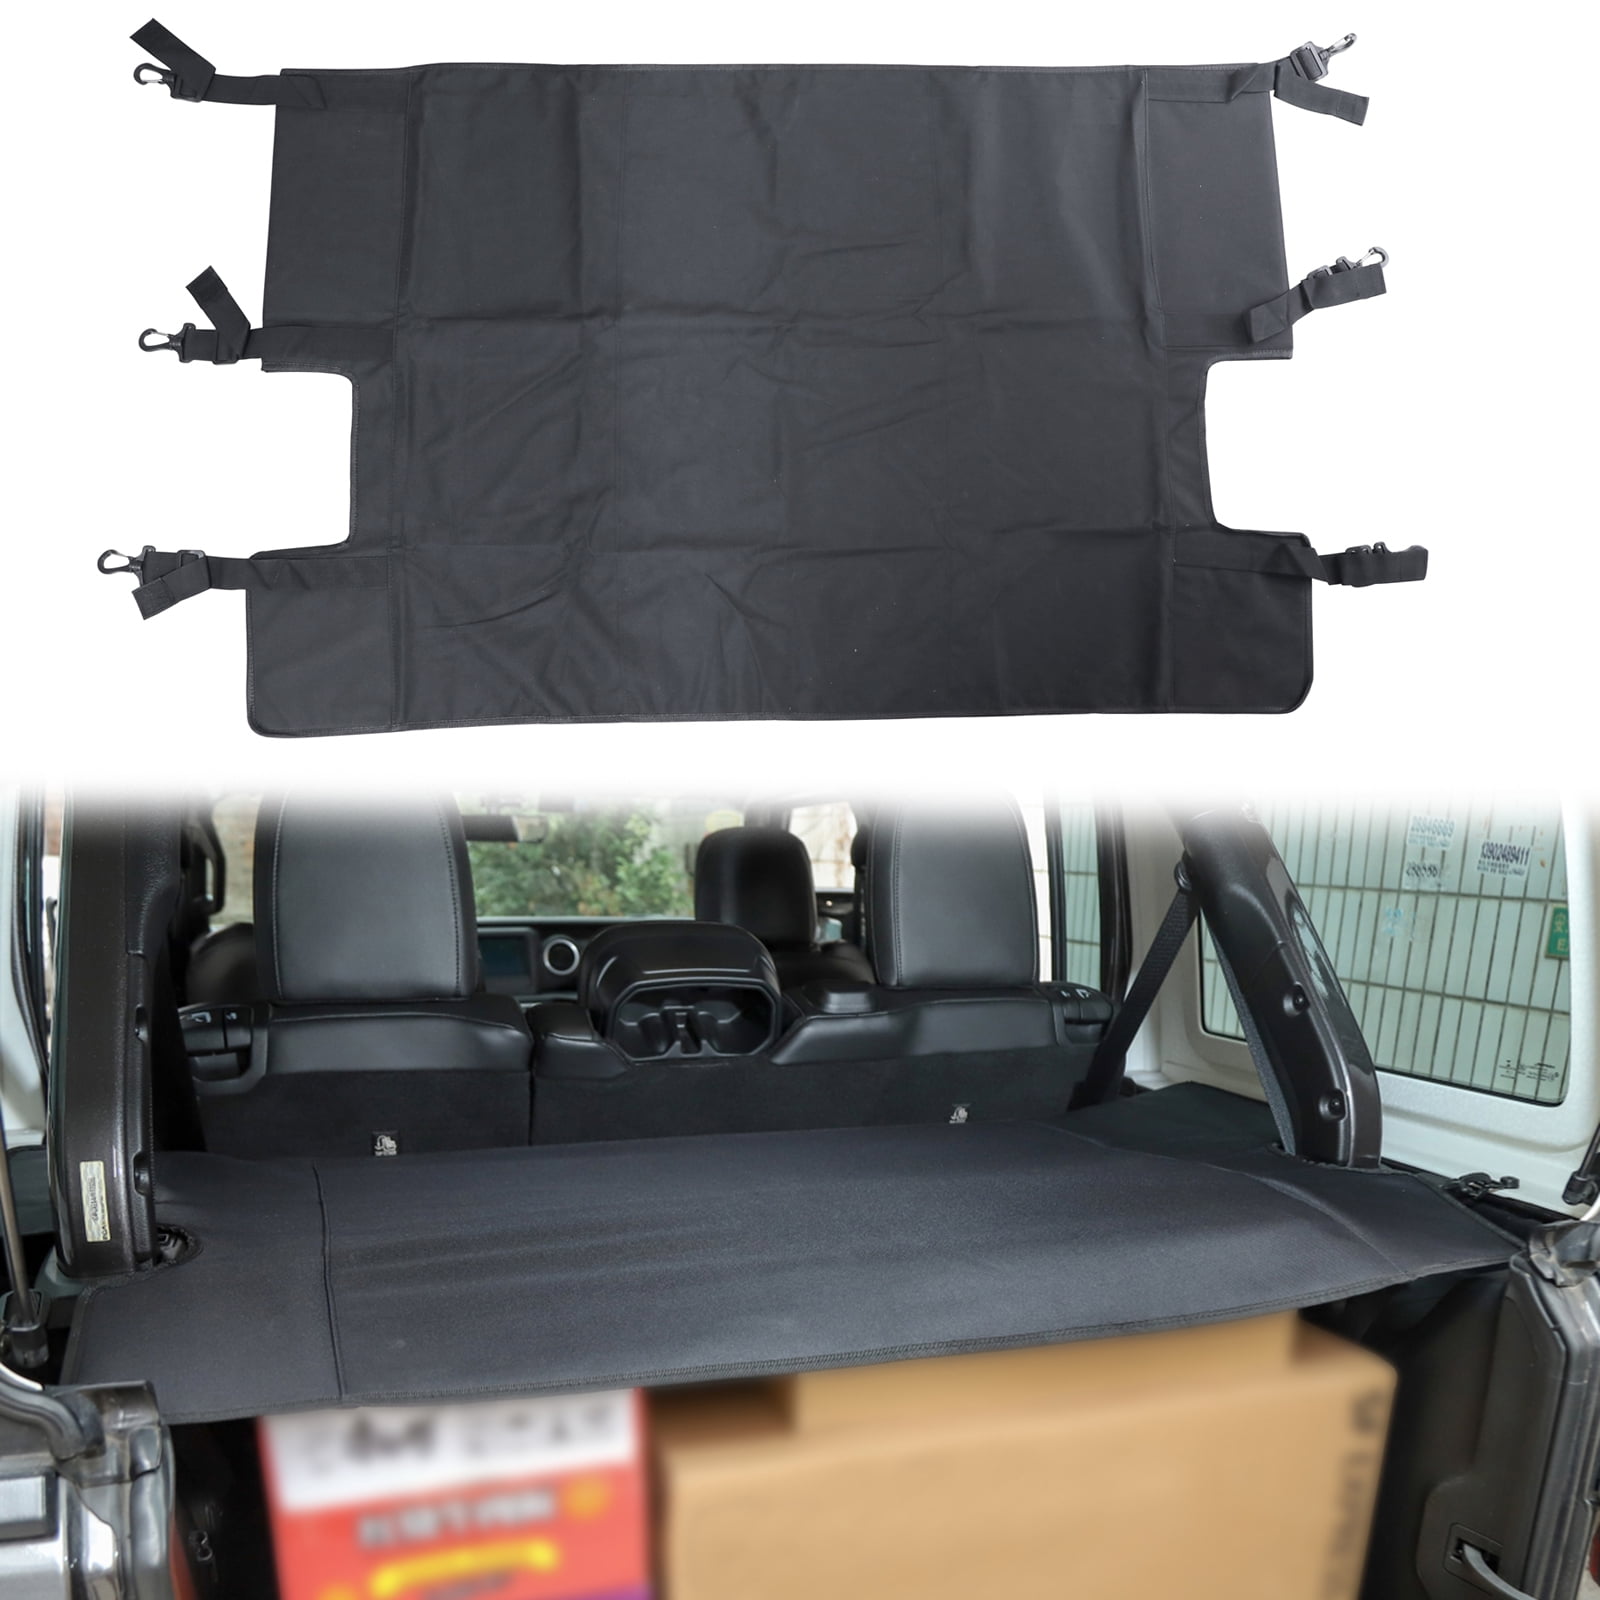 US Flag,Dog Seat Covers for 2007-2020 Jeep Wrangler JK JL 4-Door Pet Seat Proof Covers with Nonslip Multipurpose 600D Oxford Fabric KOLEMO Hammock Style 